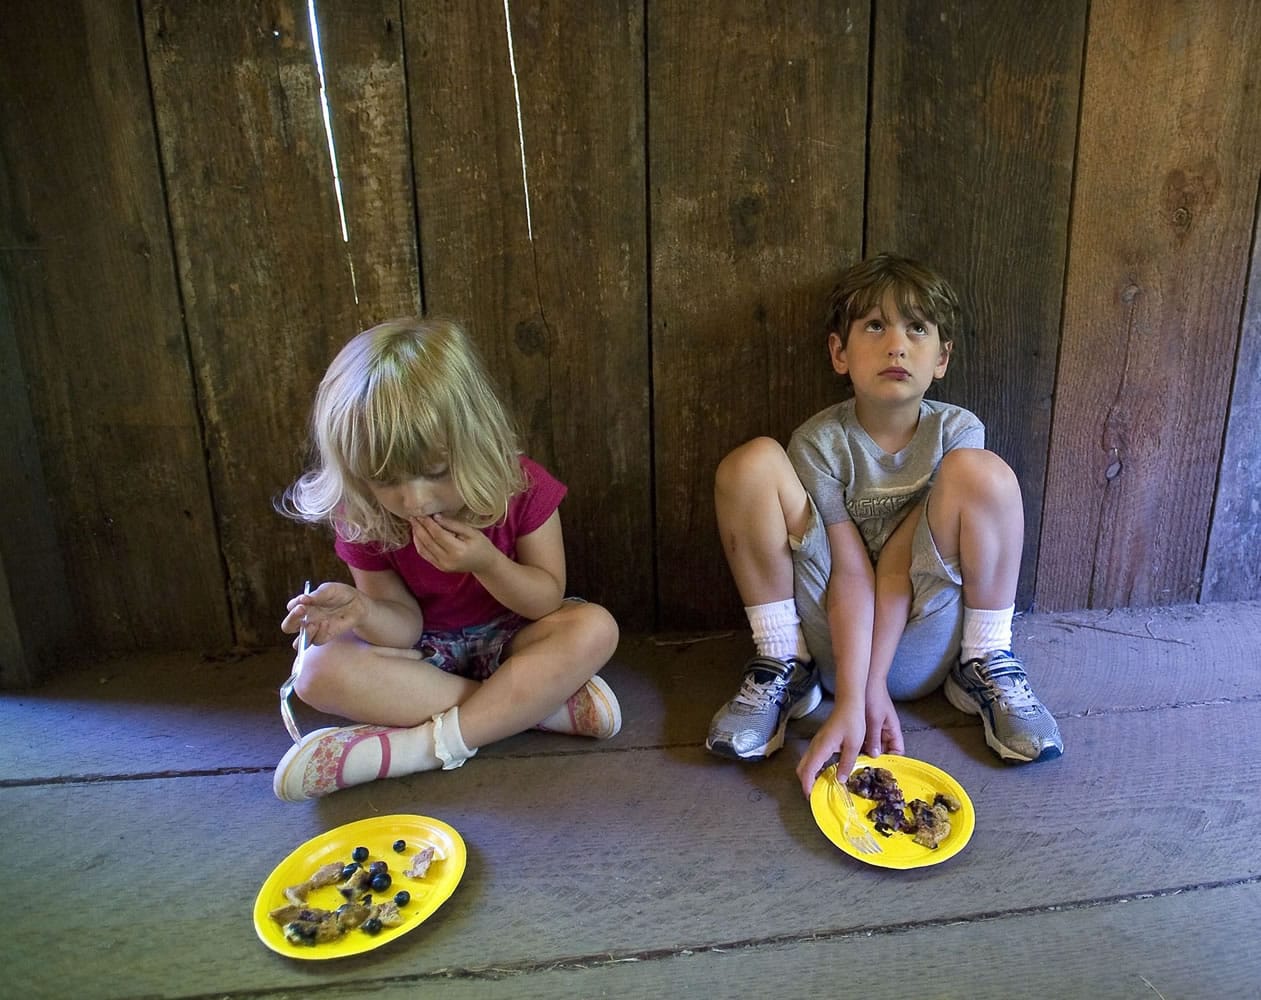 Three-year-old Addison Keeling, left, and her brother Jack, 6, both of La Center, sample some blueberry pancakes during a fundraiser Saturday at Cedar Creek Grist Mill.